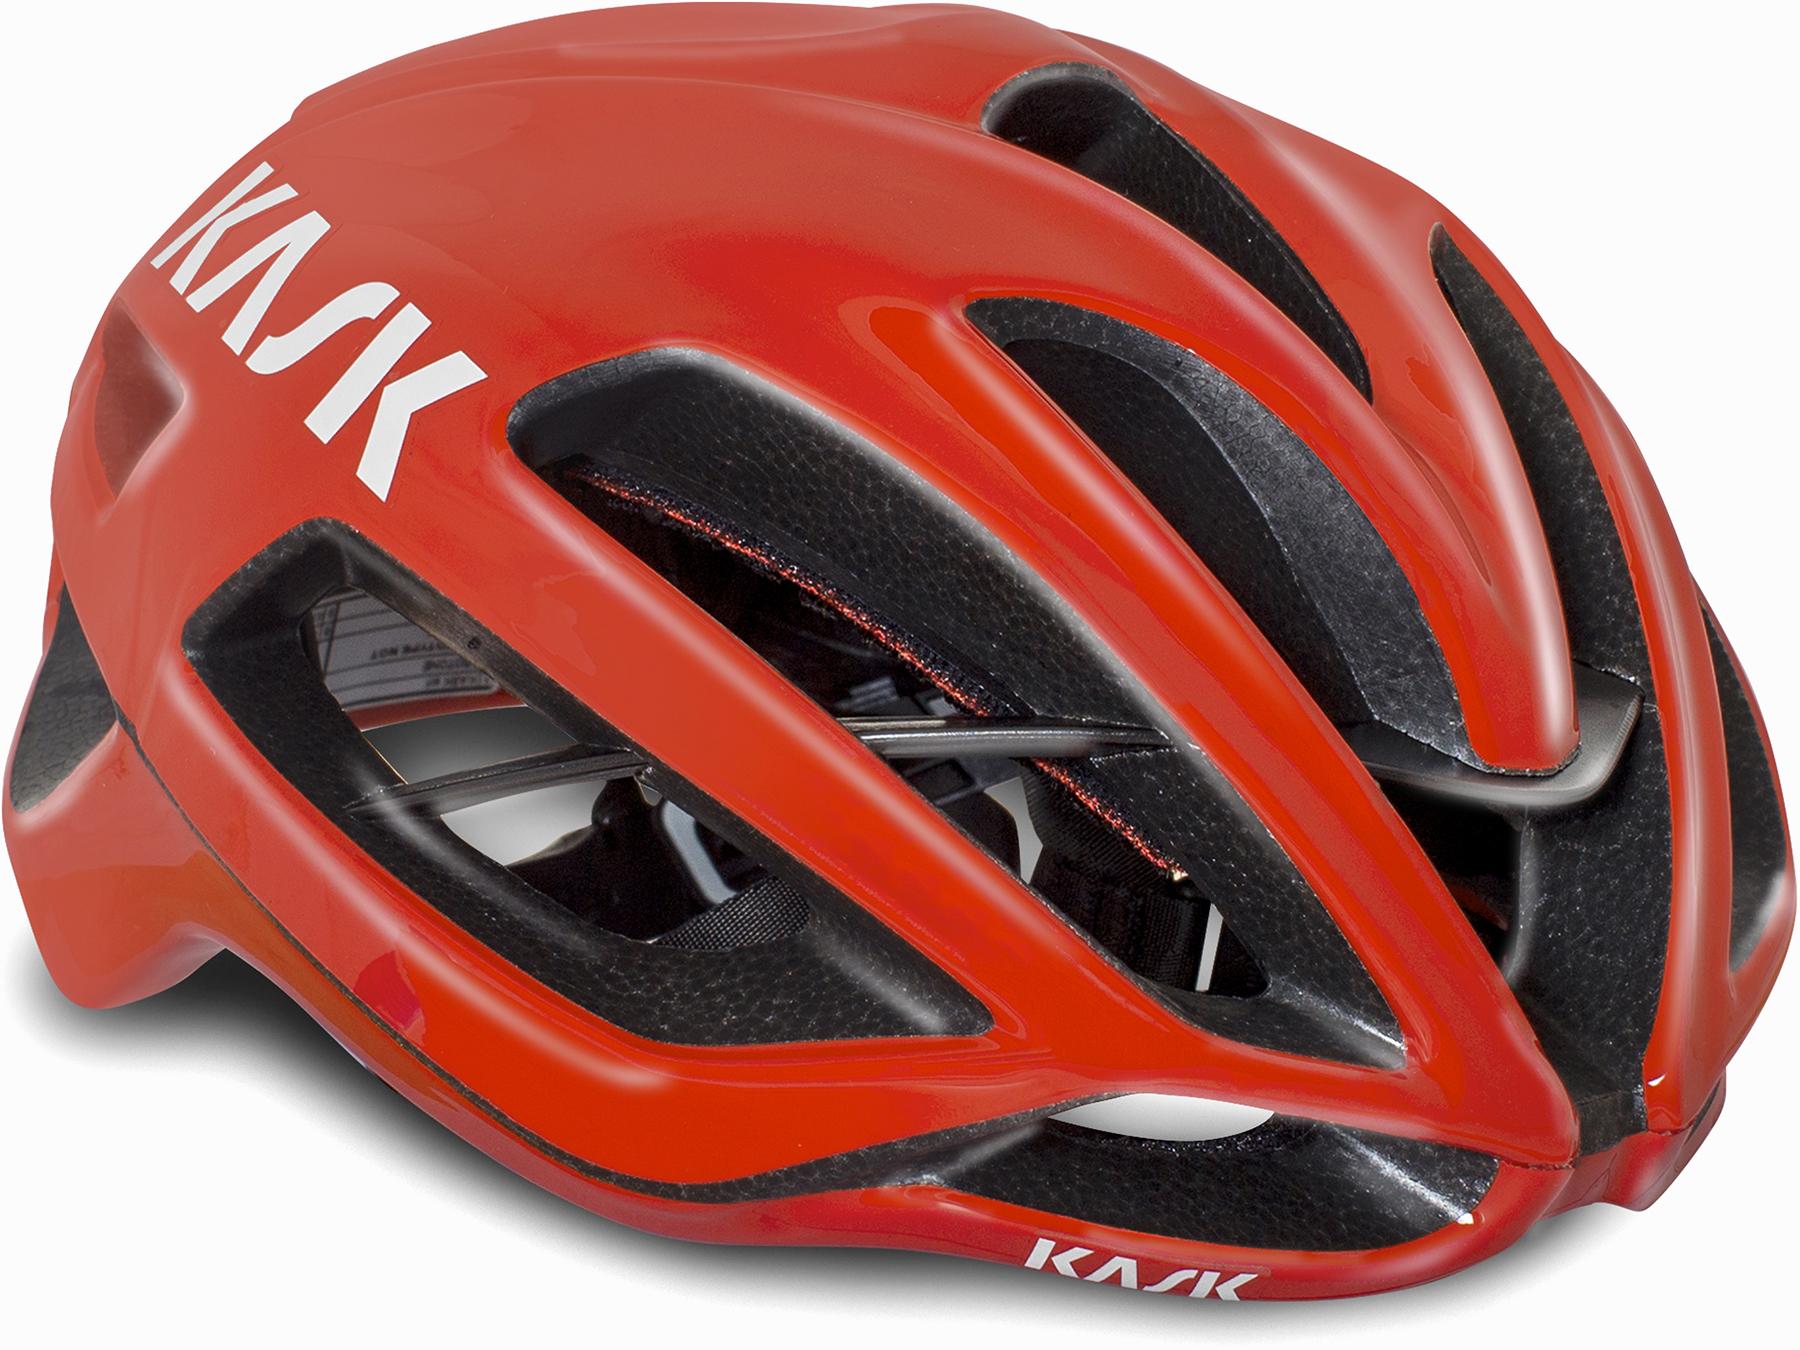 Image of Casque de route Kask Protone (WG11) - Red